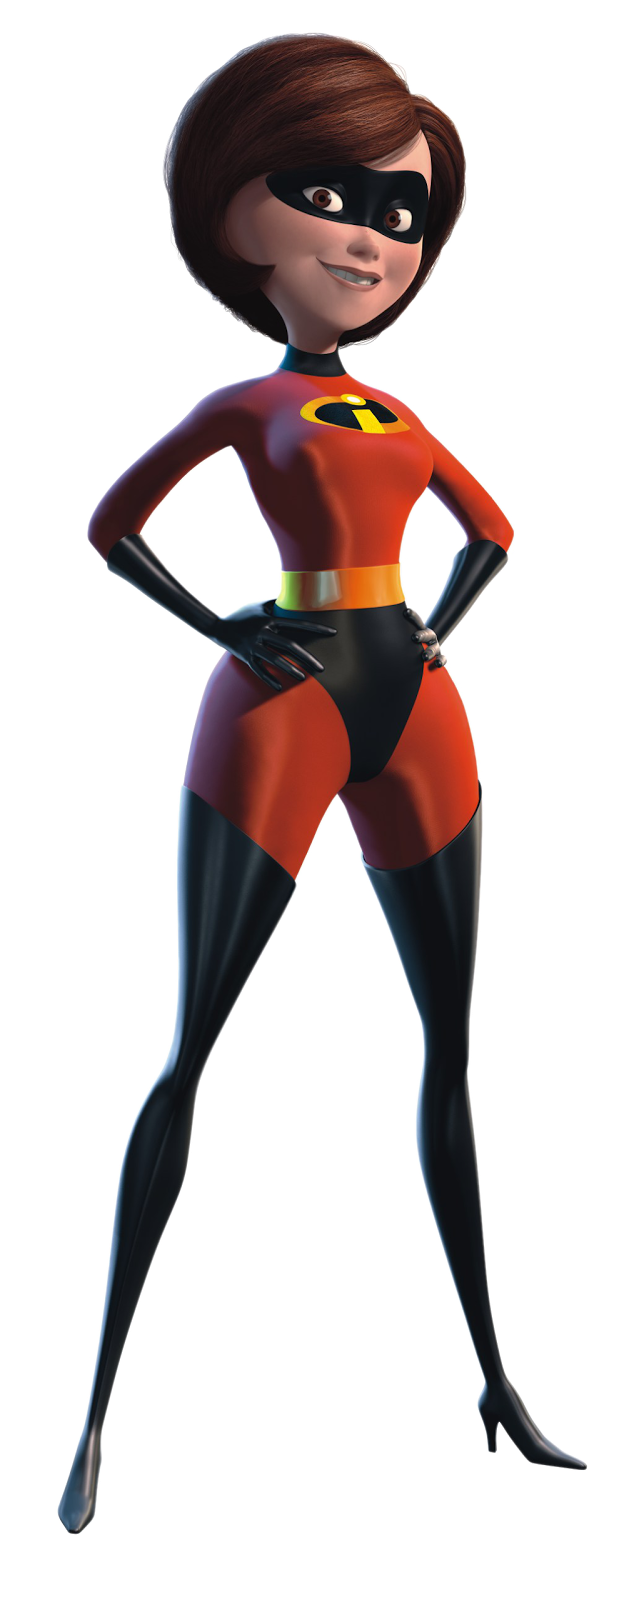 The Incredibles Transparent Image PNG Image